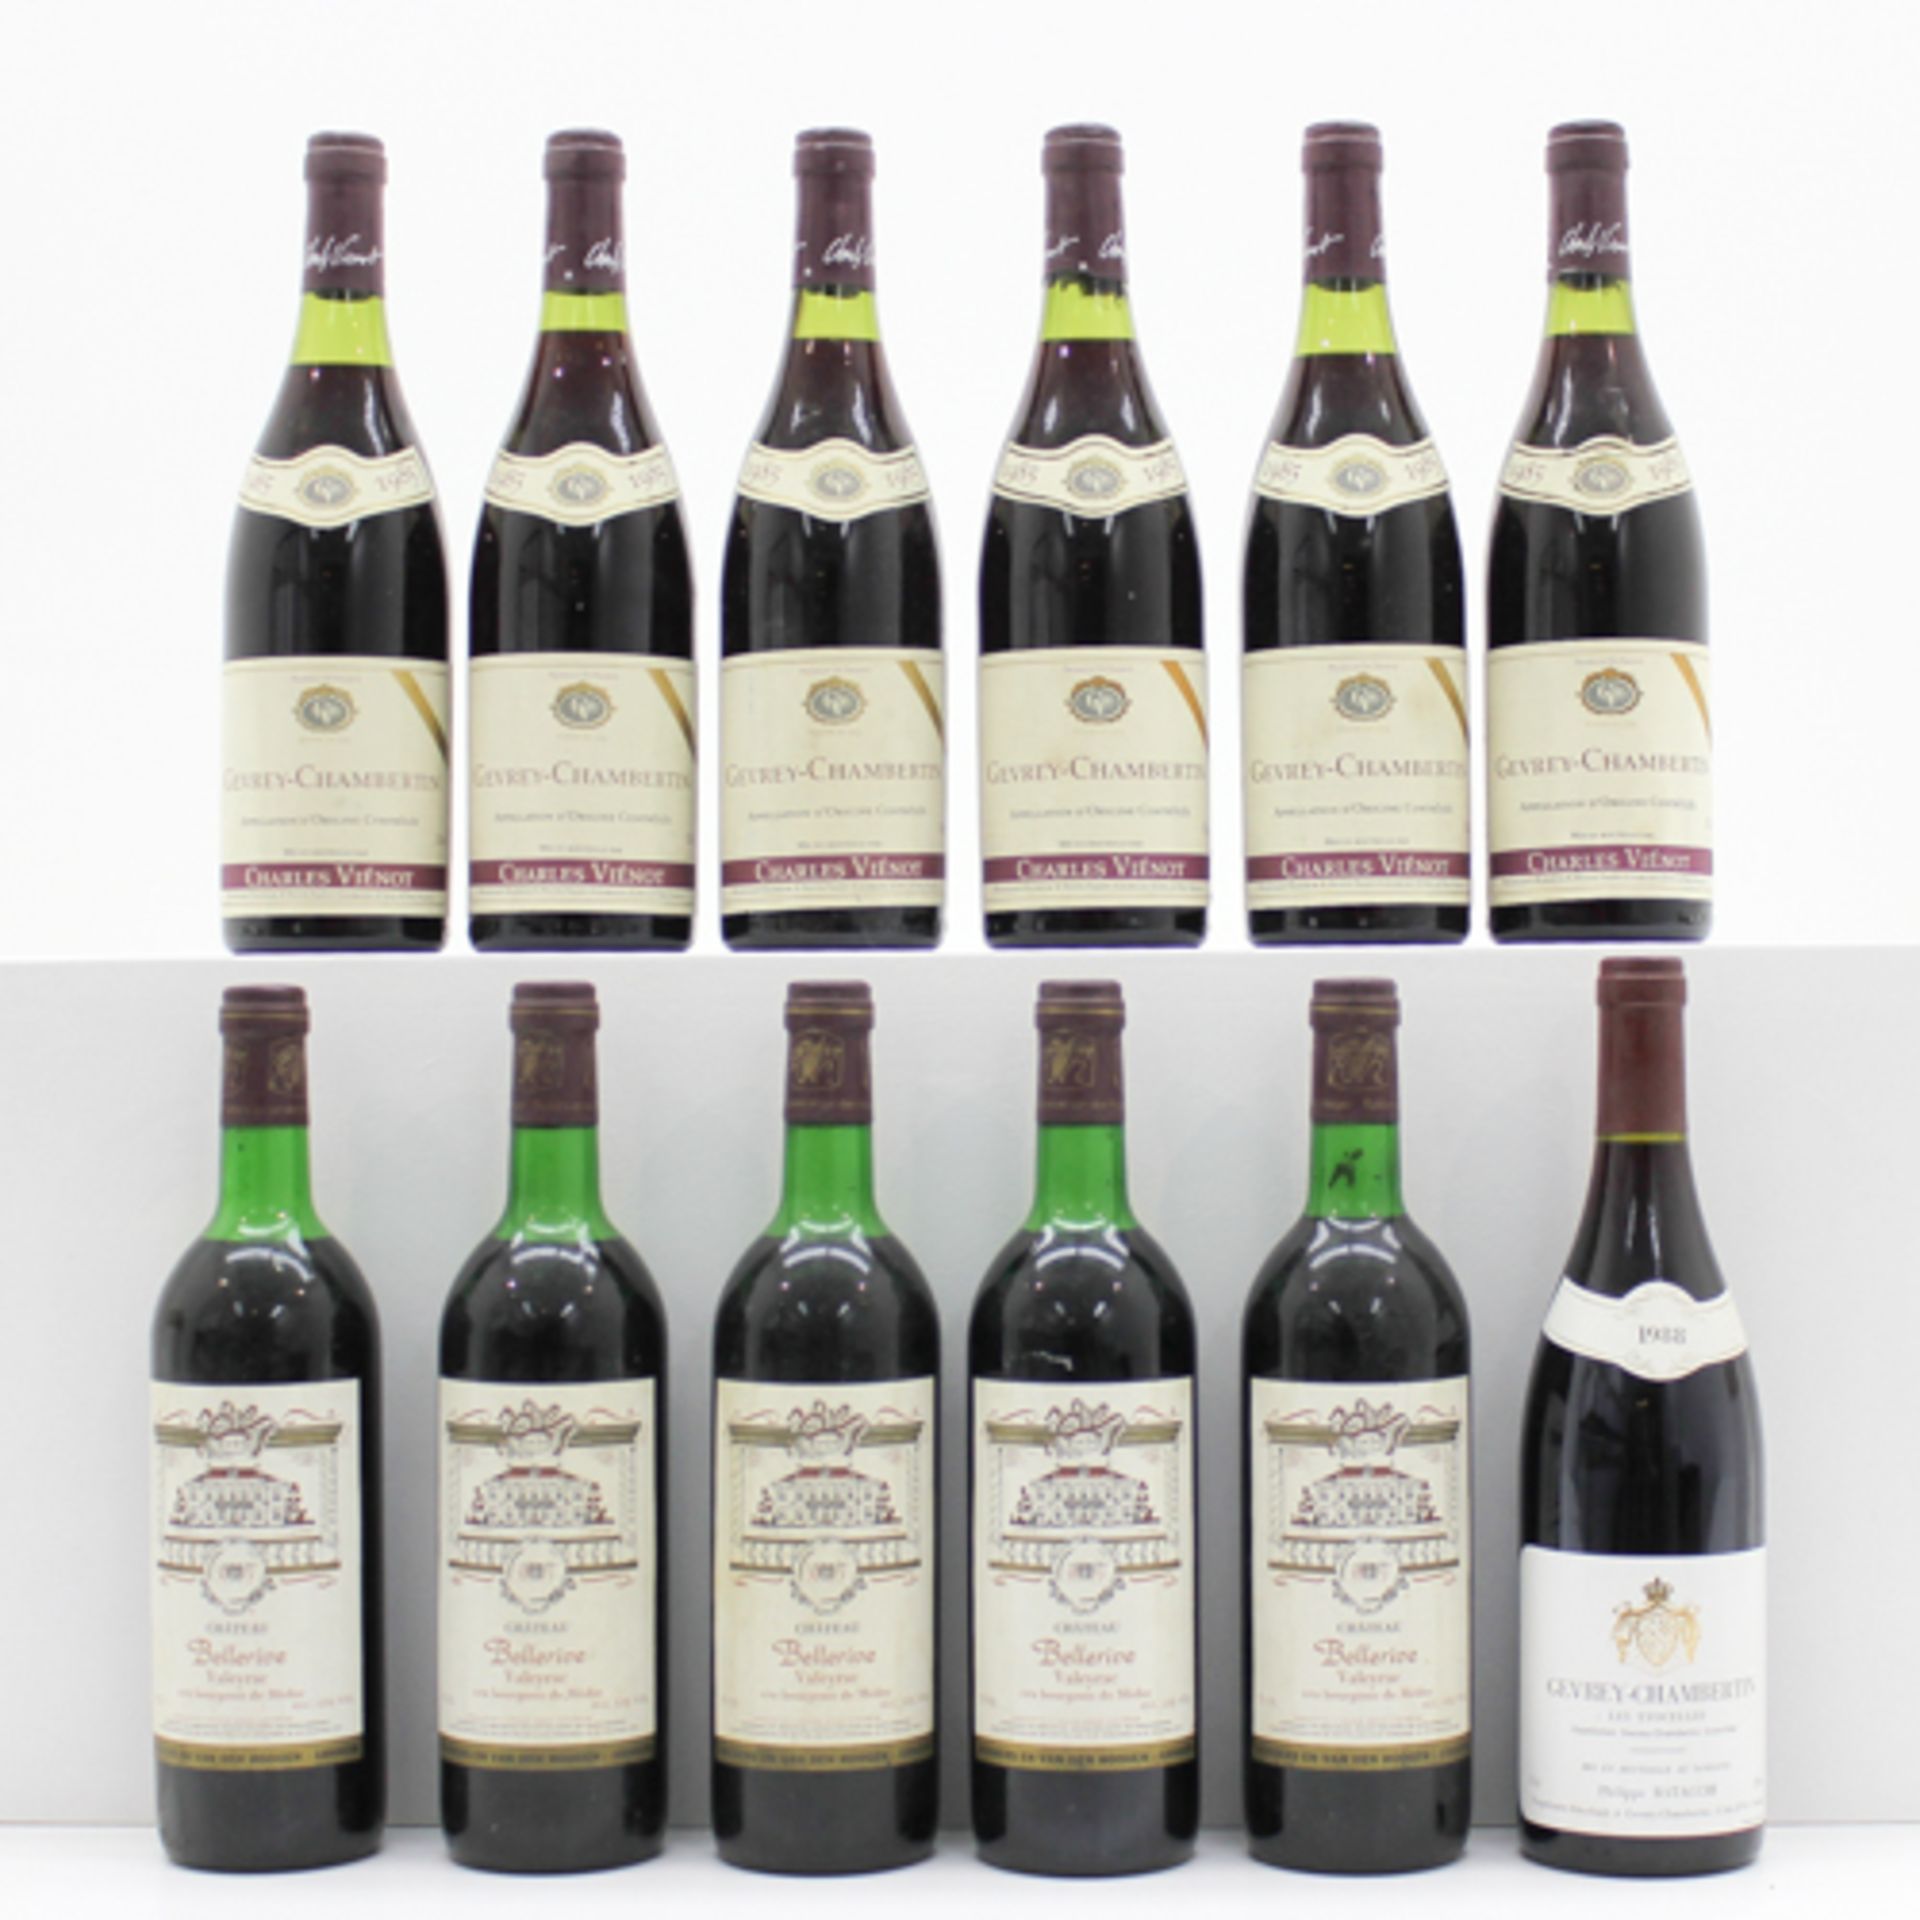 LOT OF 12 BOTTLES OF WINE Including Chateau Bellerive, 1976.